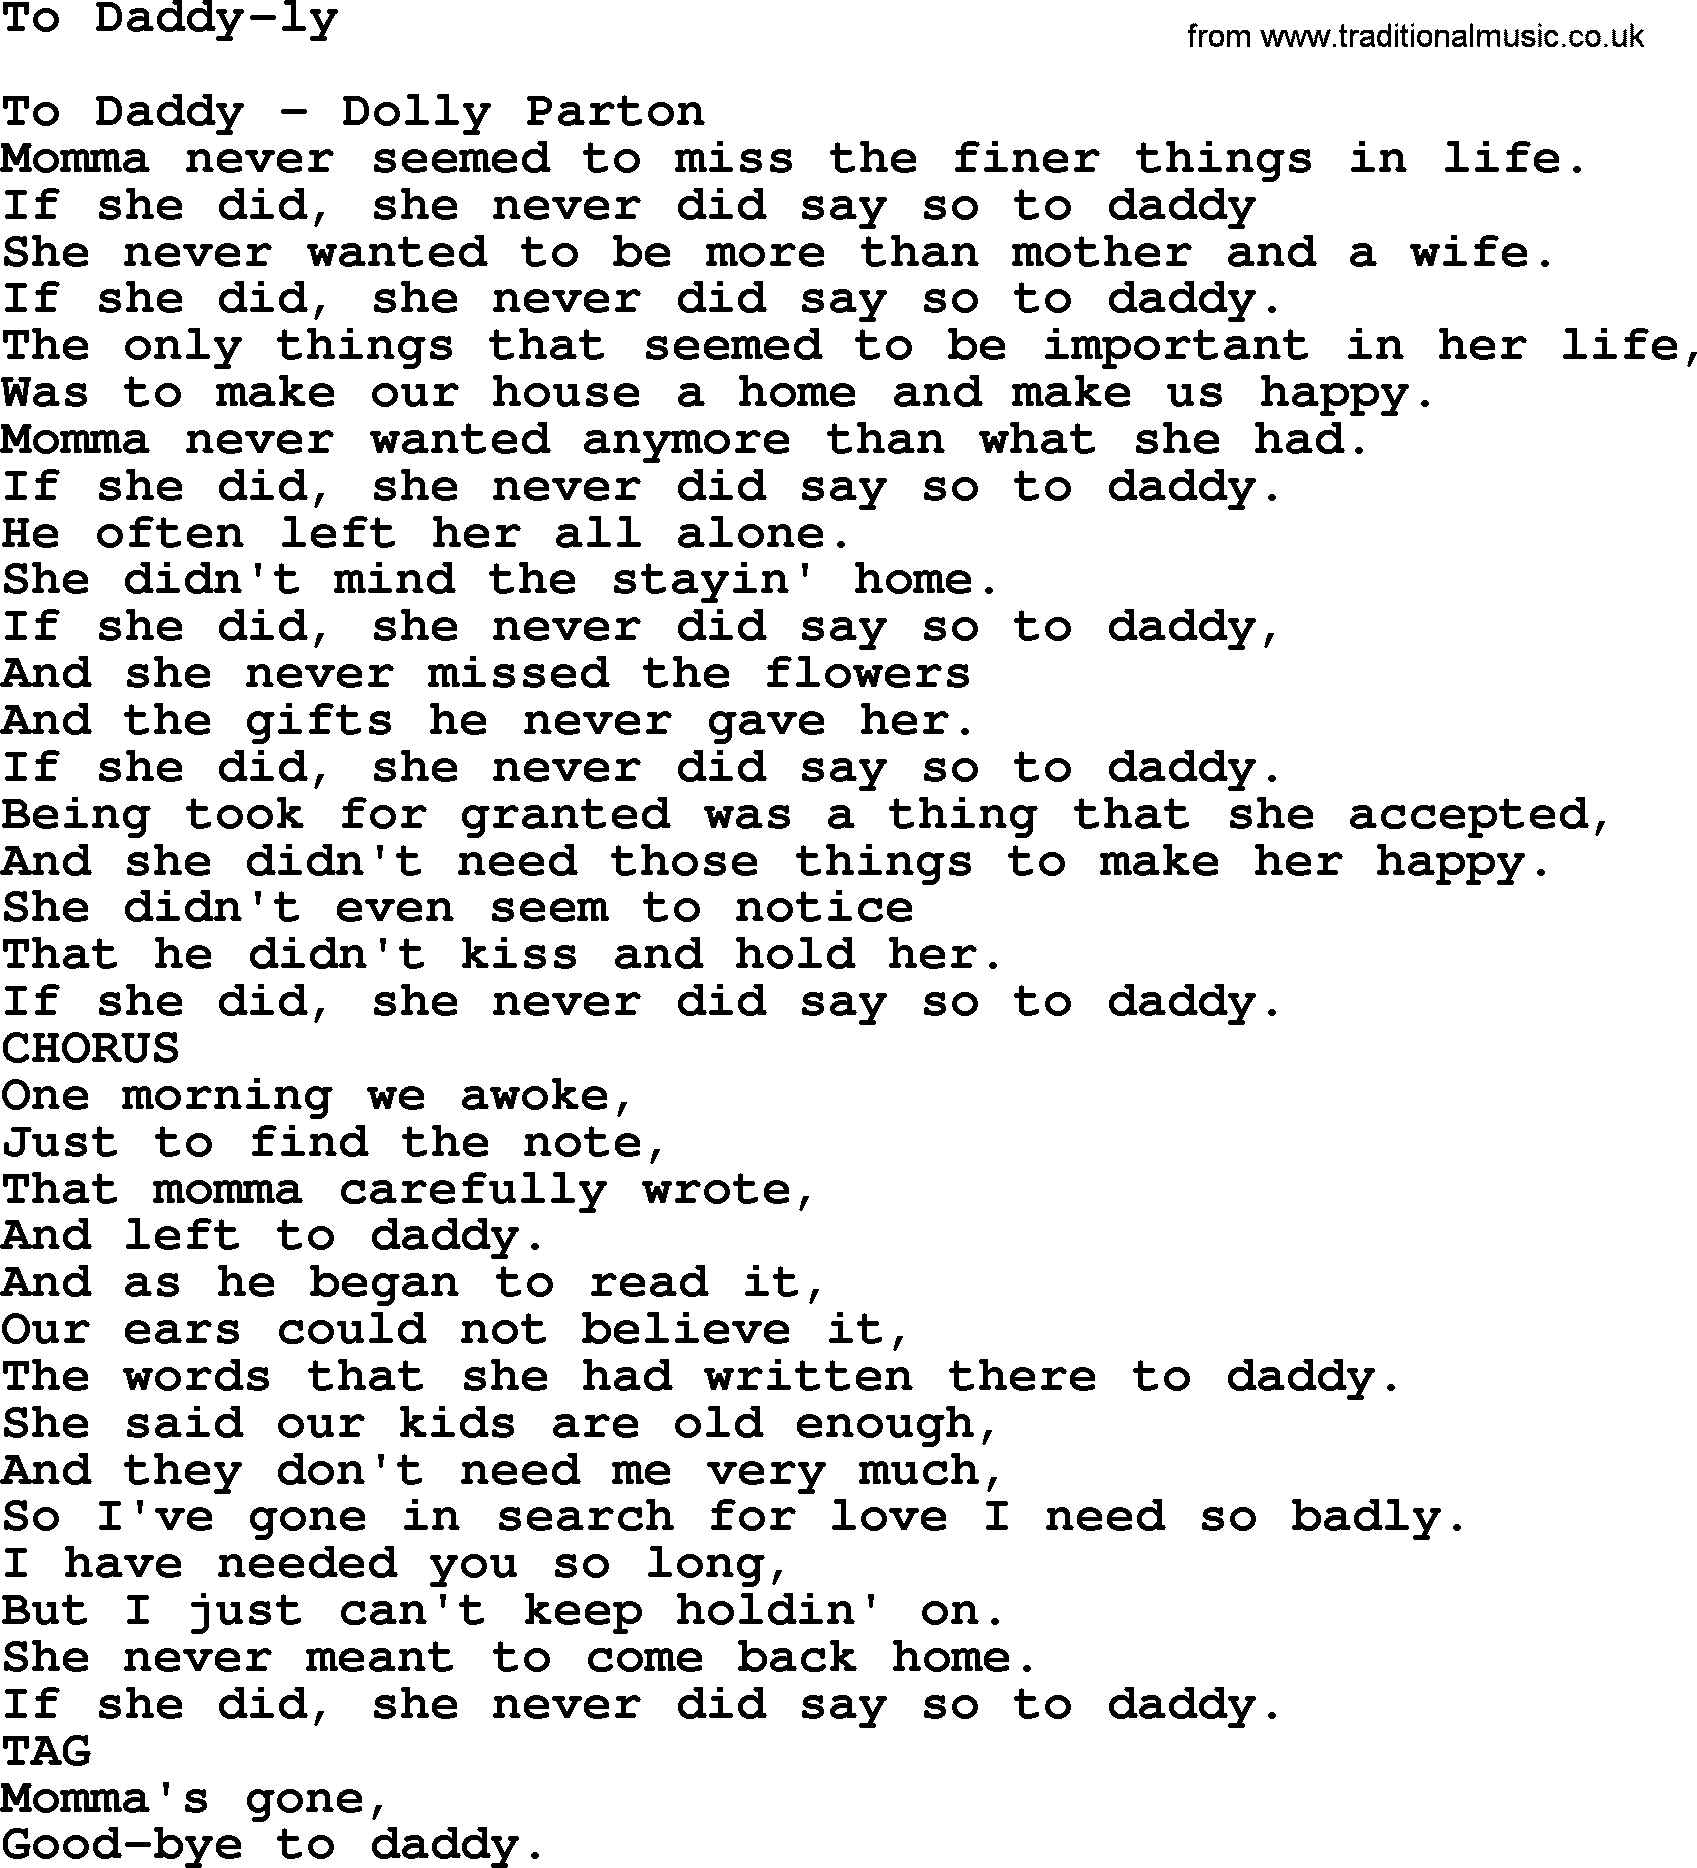 Dolly Parton song To Daddy-ly.txt lyrics